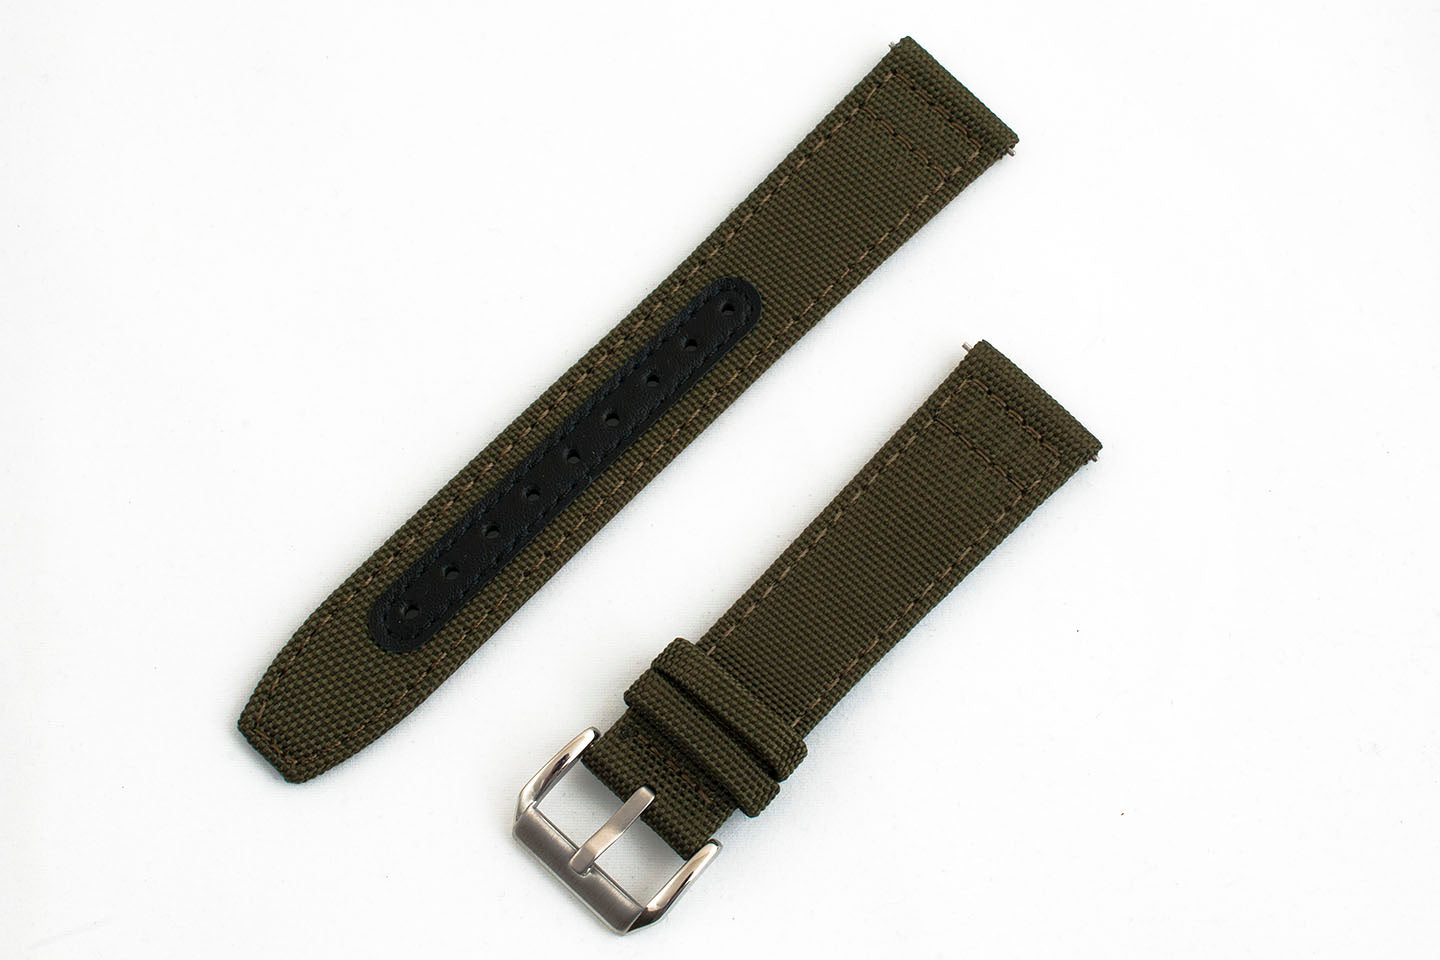 Premium Sailcloth quick release watch strap band replacement 19mm, 20mm, 21mm, 22mm green OD